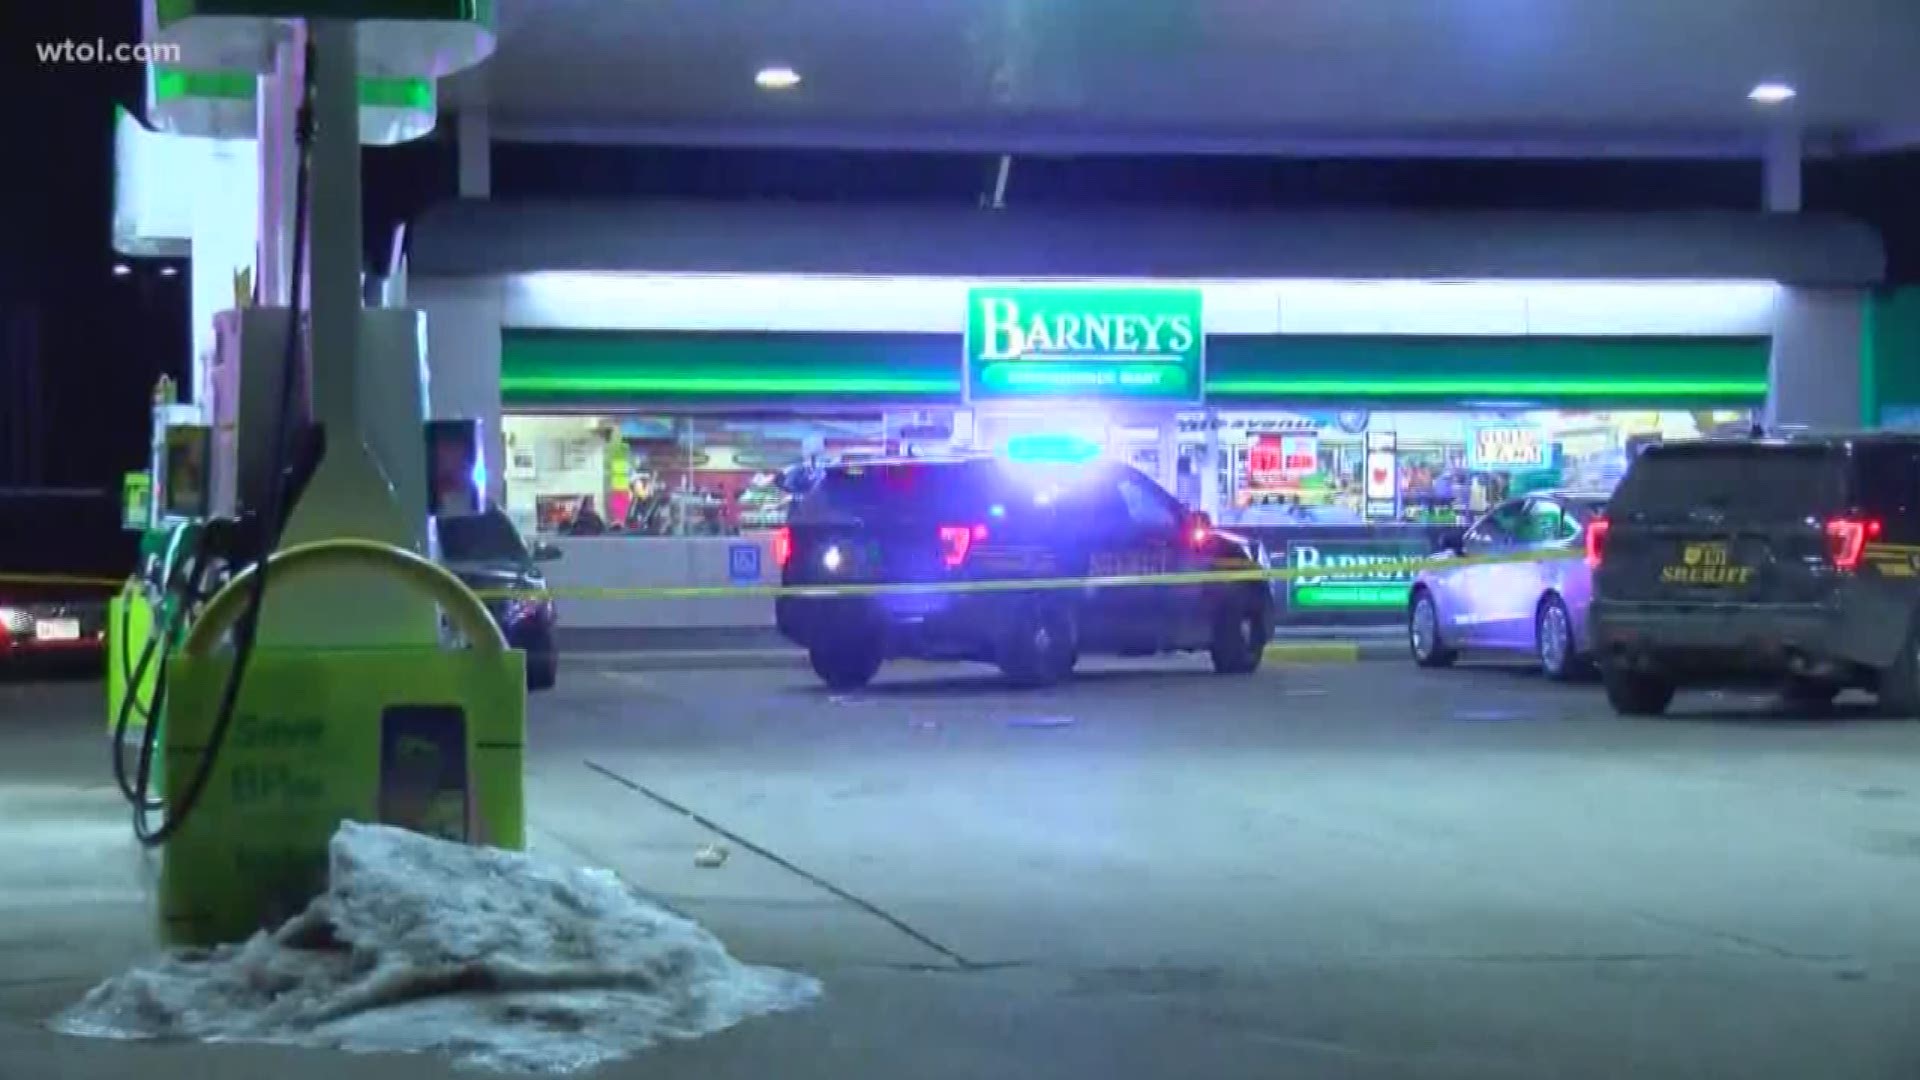 Police say a suspect covered in black went behind the counter and grabbed the register before fleeing the scene.